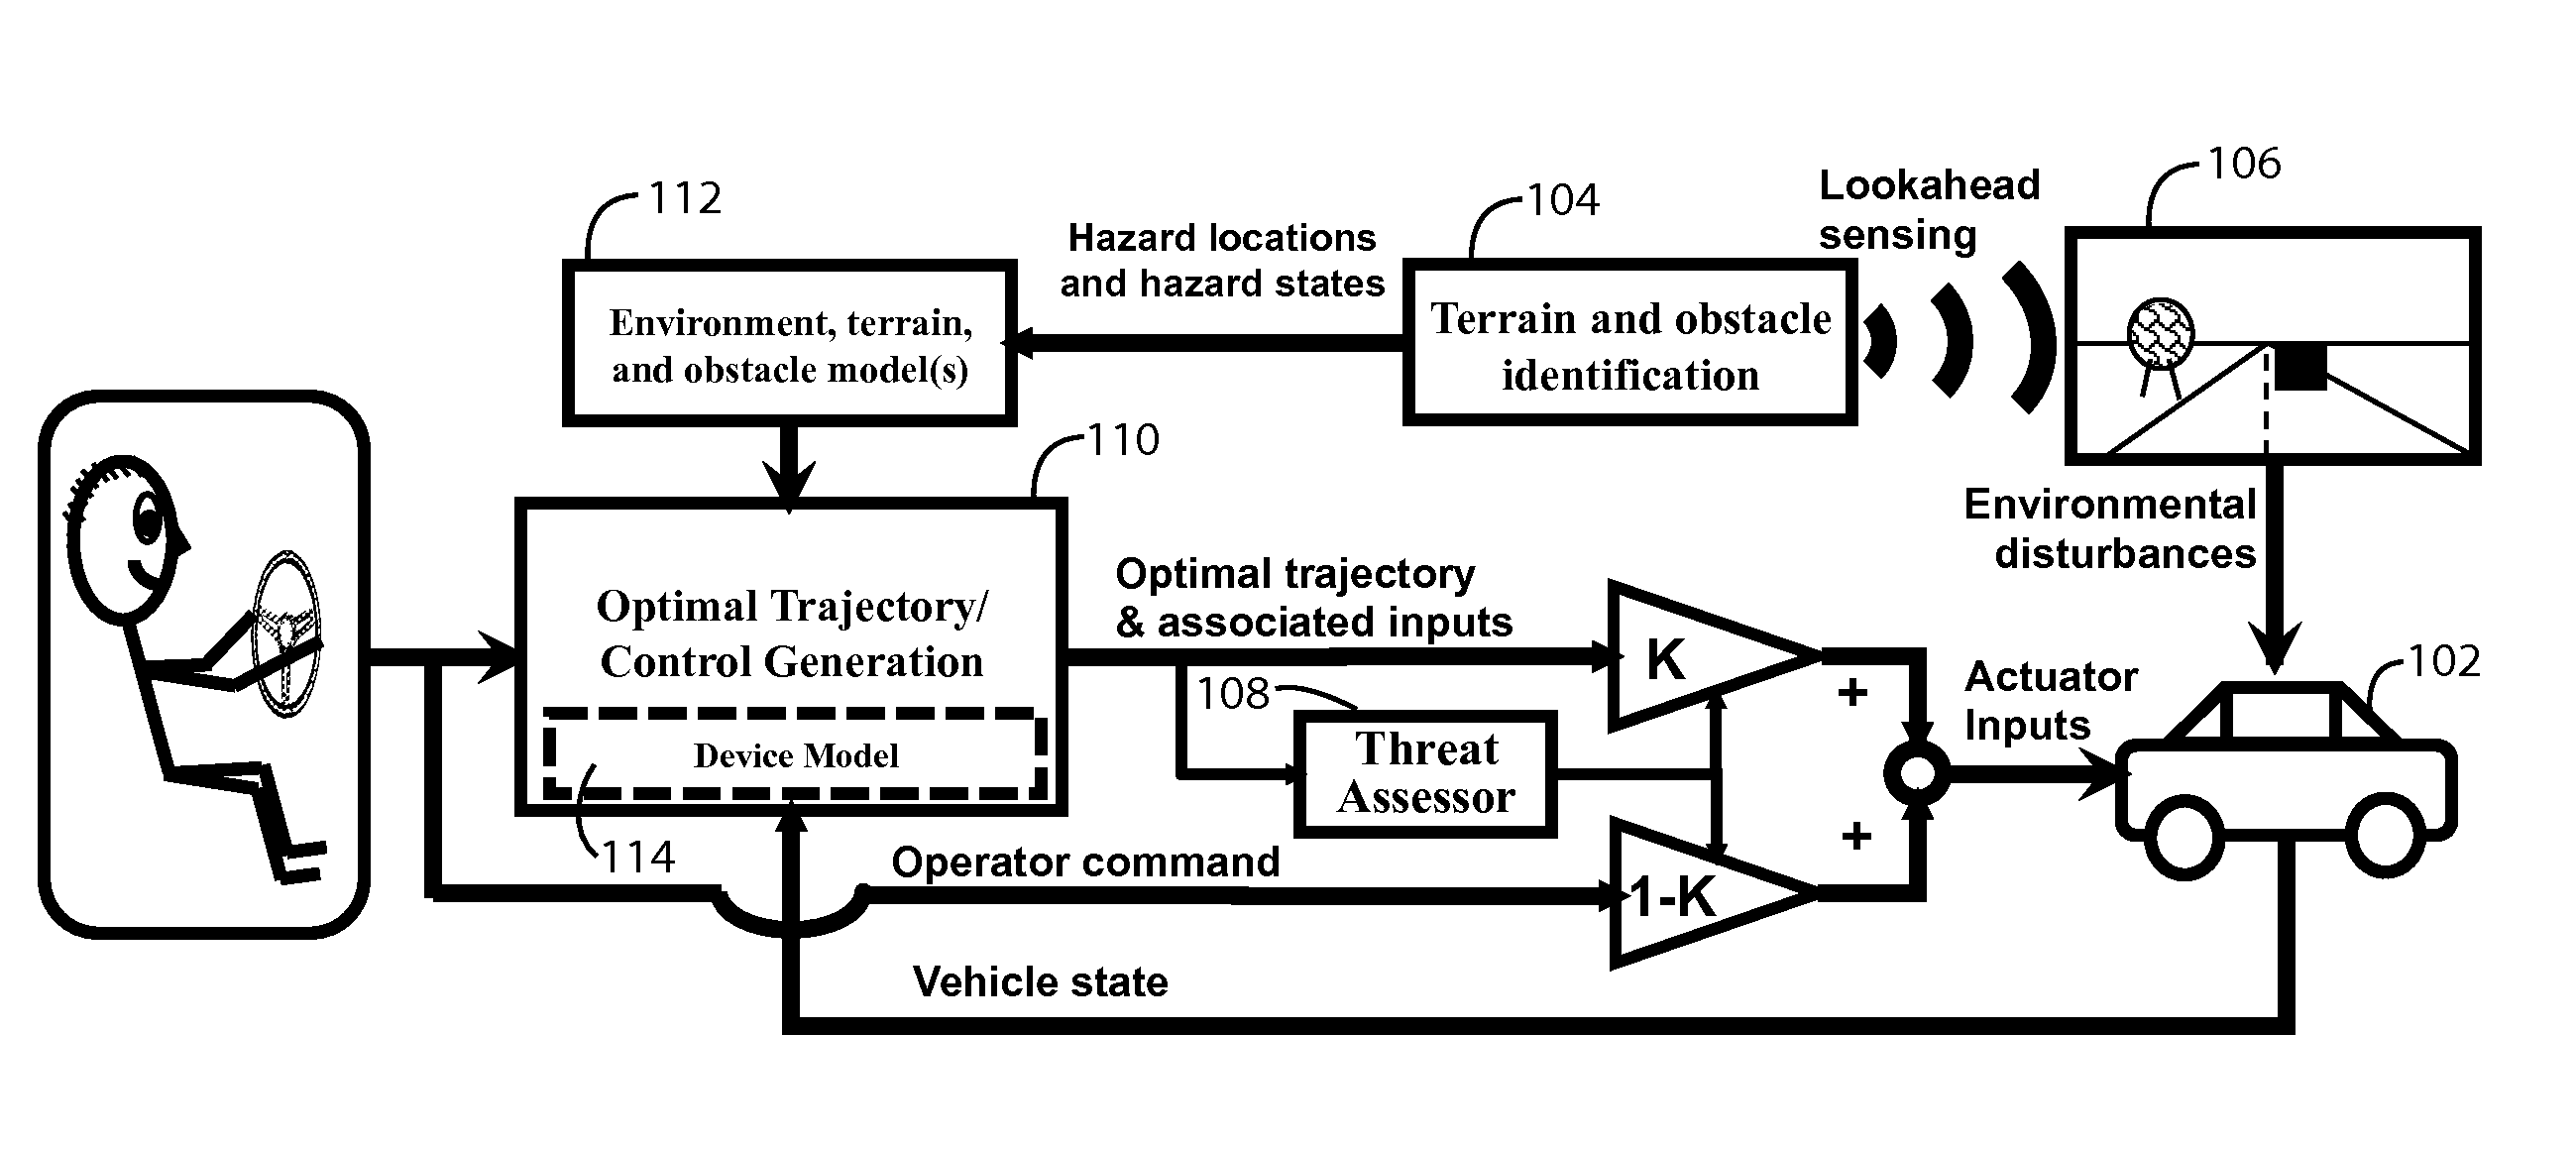 Integrated framework for vehicle operator assistance based on a trajectory and threat assessment